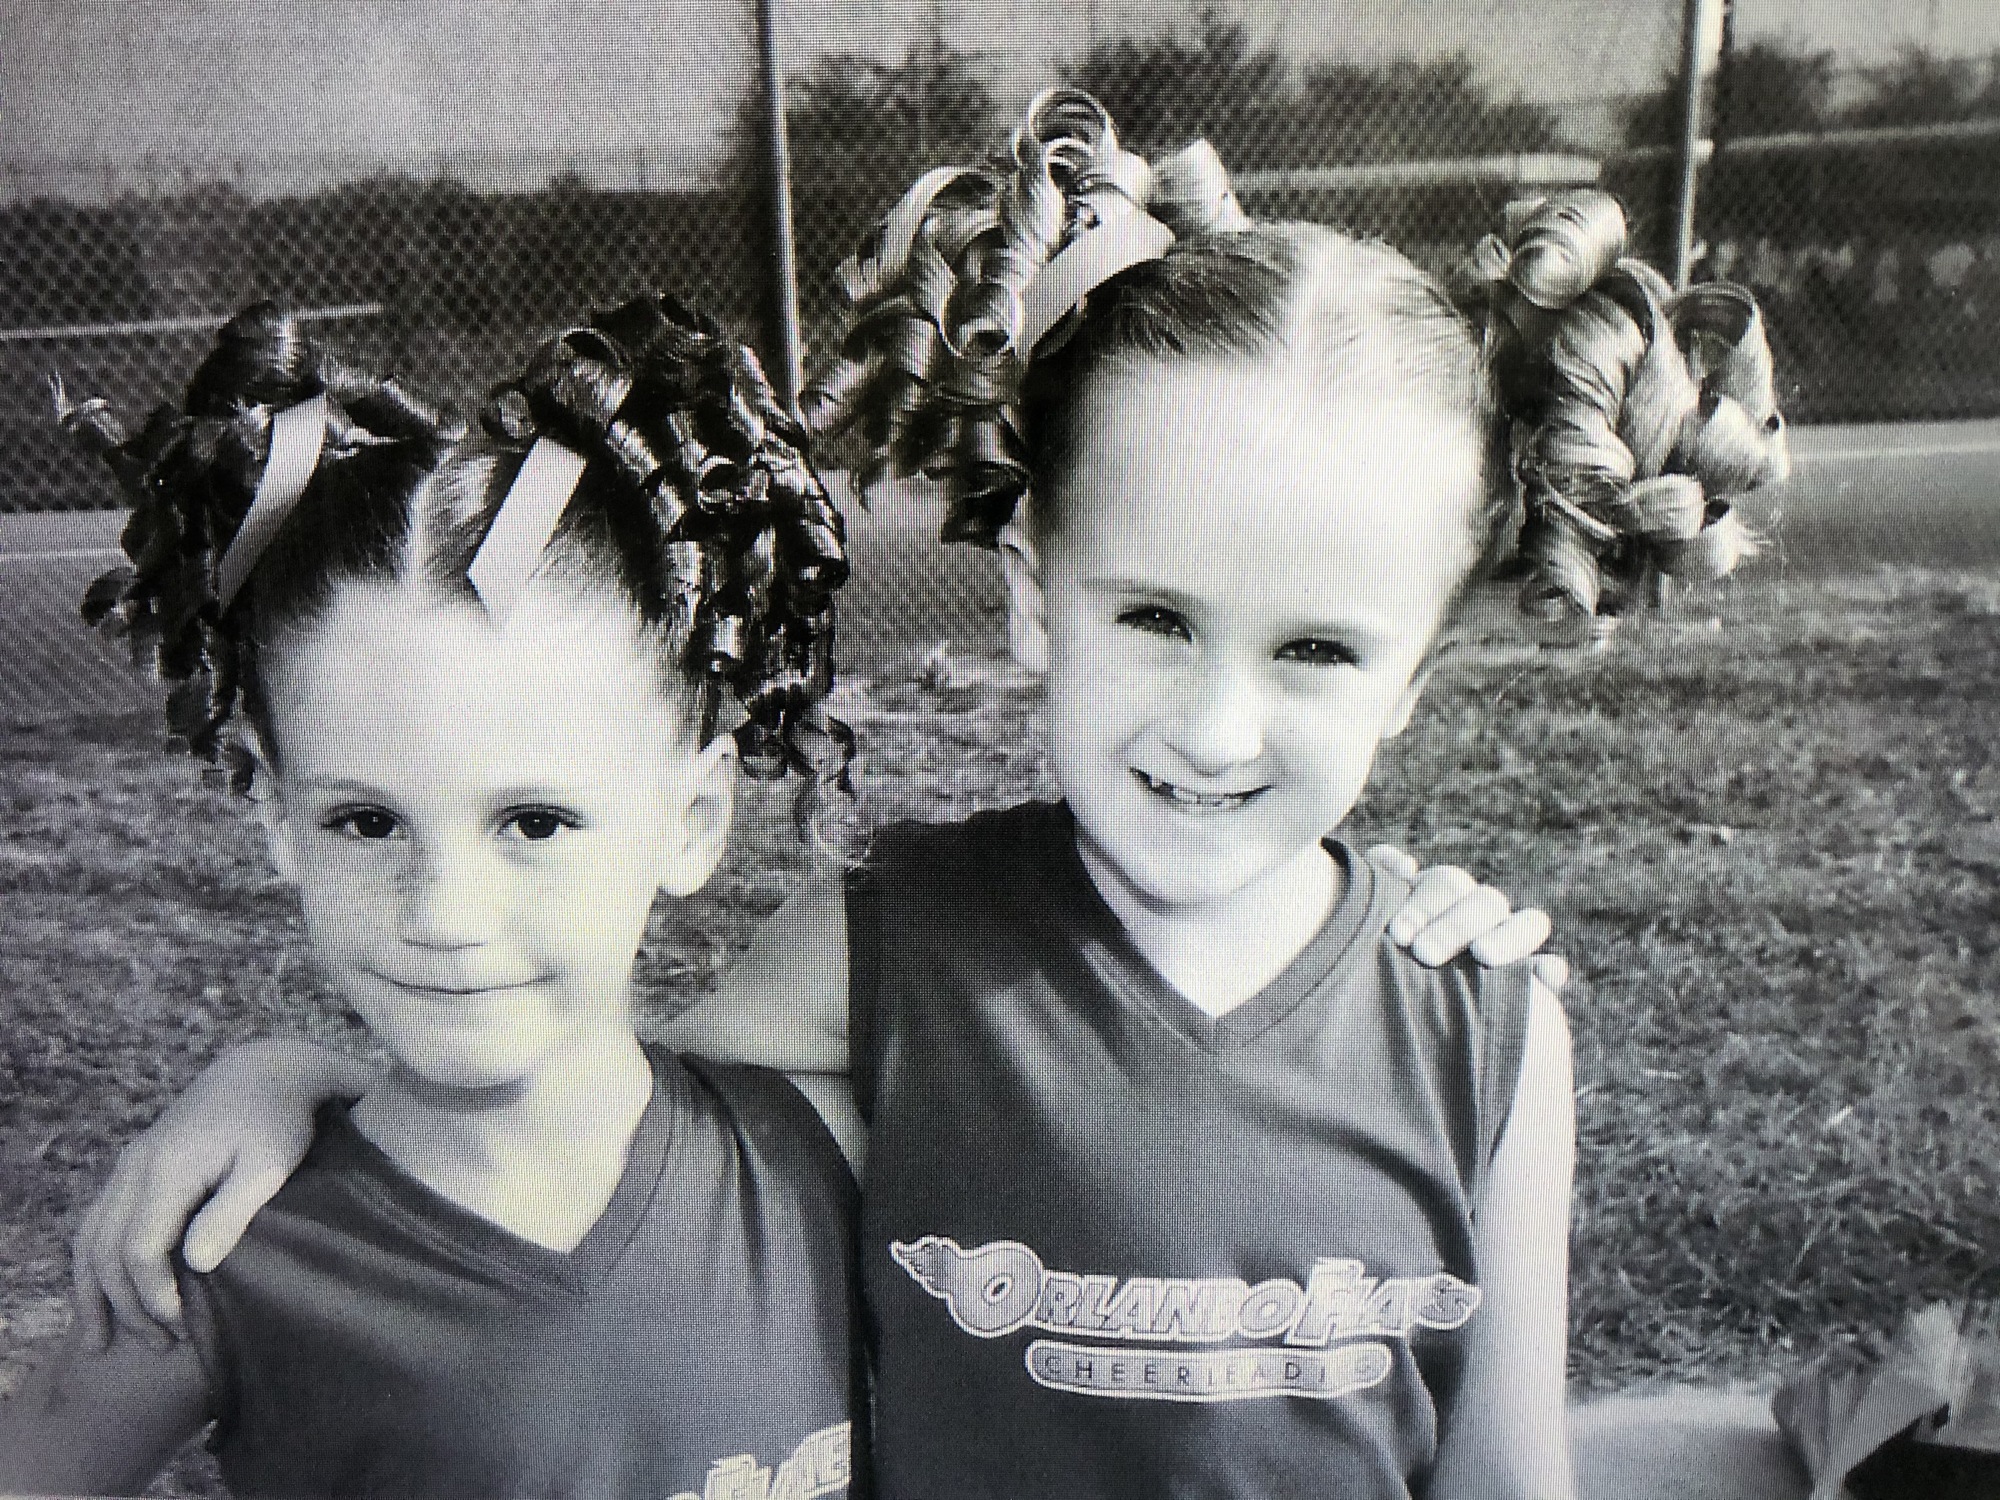 Raygan Cristello, left, and Allison Couch cheered for the Orlando Flames.